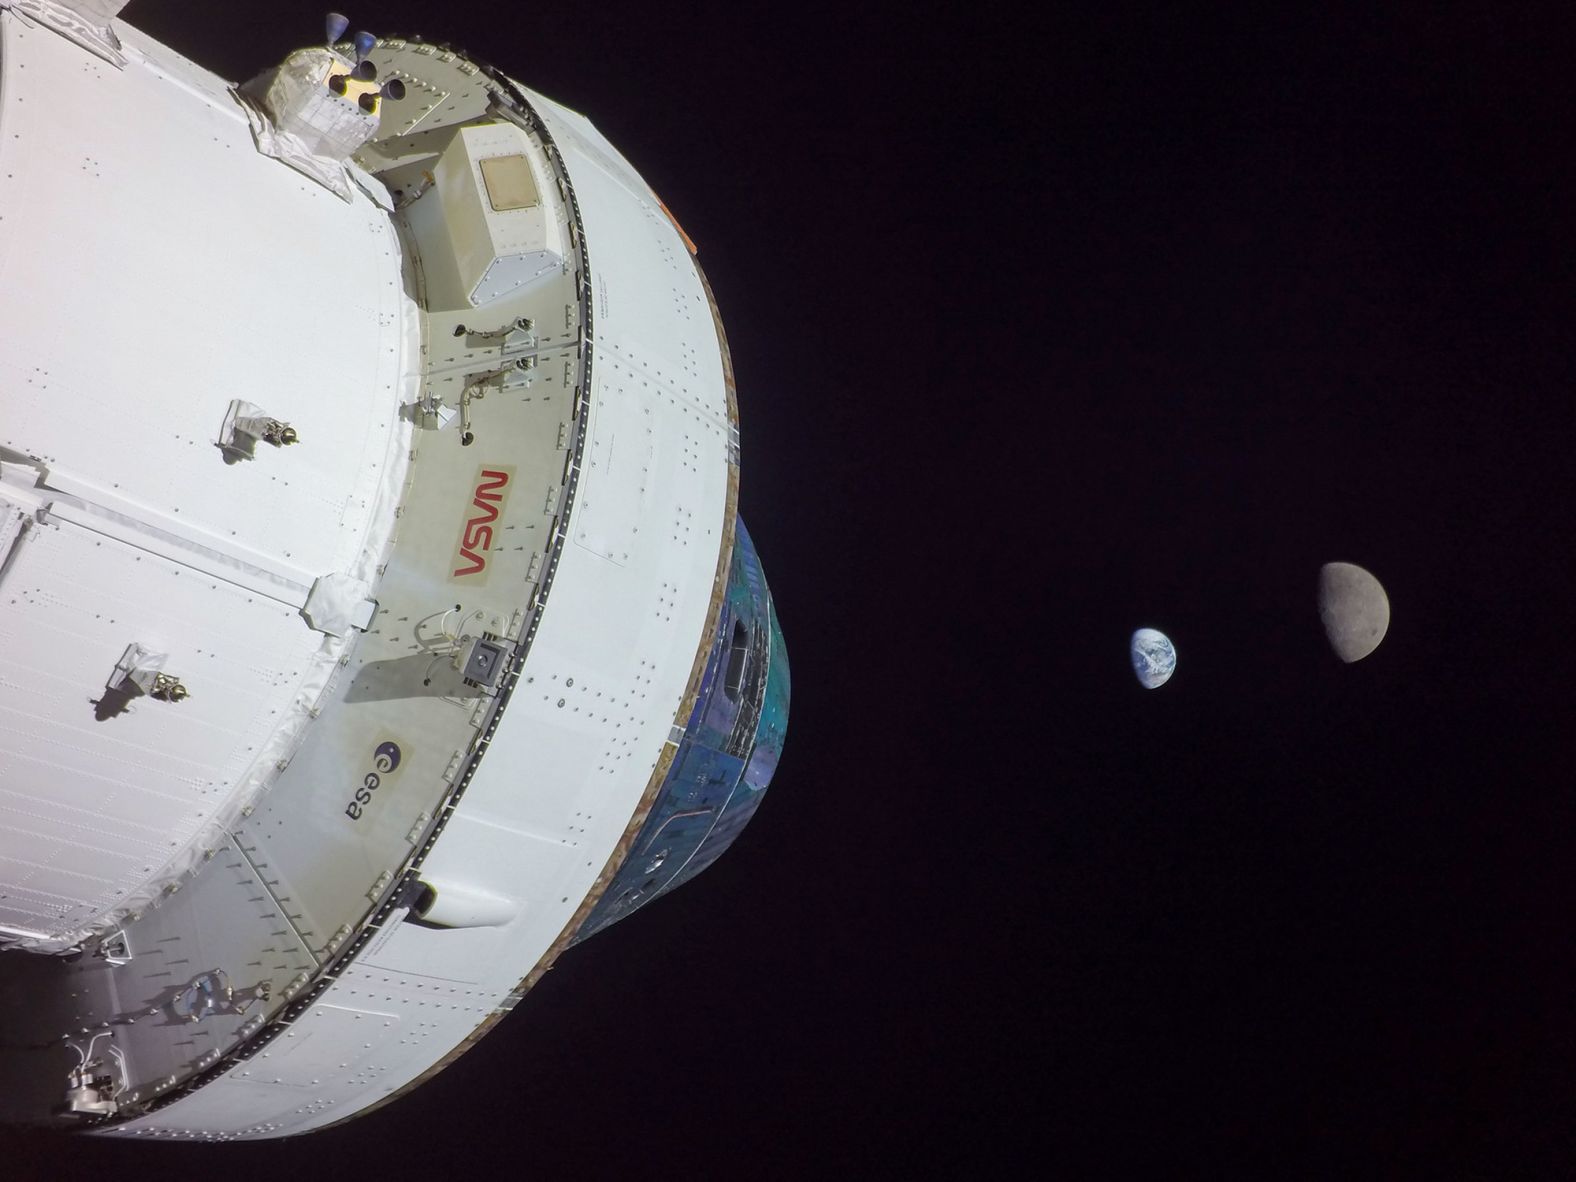 NASA's Orion spacecraft captured a photo of the Earth and moon on the twelfth day of the Artemis I mission. Orion reaching a maximum distance of nearly 270,000 miles from Earth, before beginning the trip back.